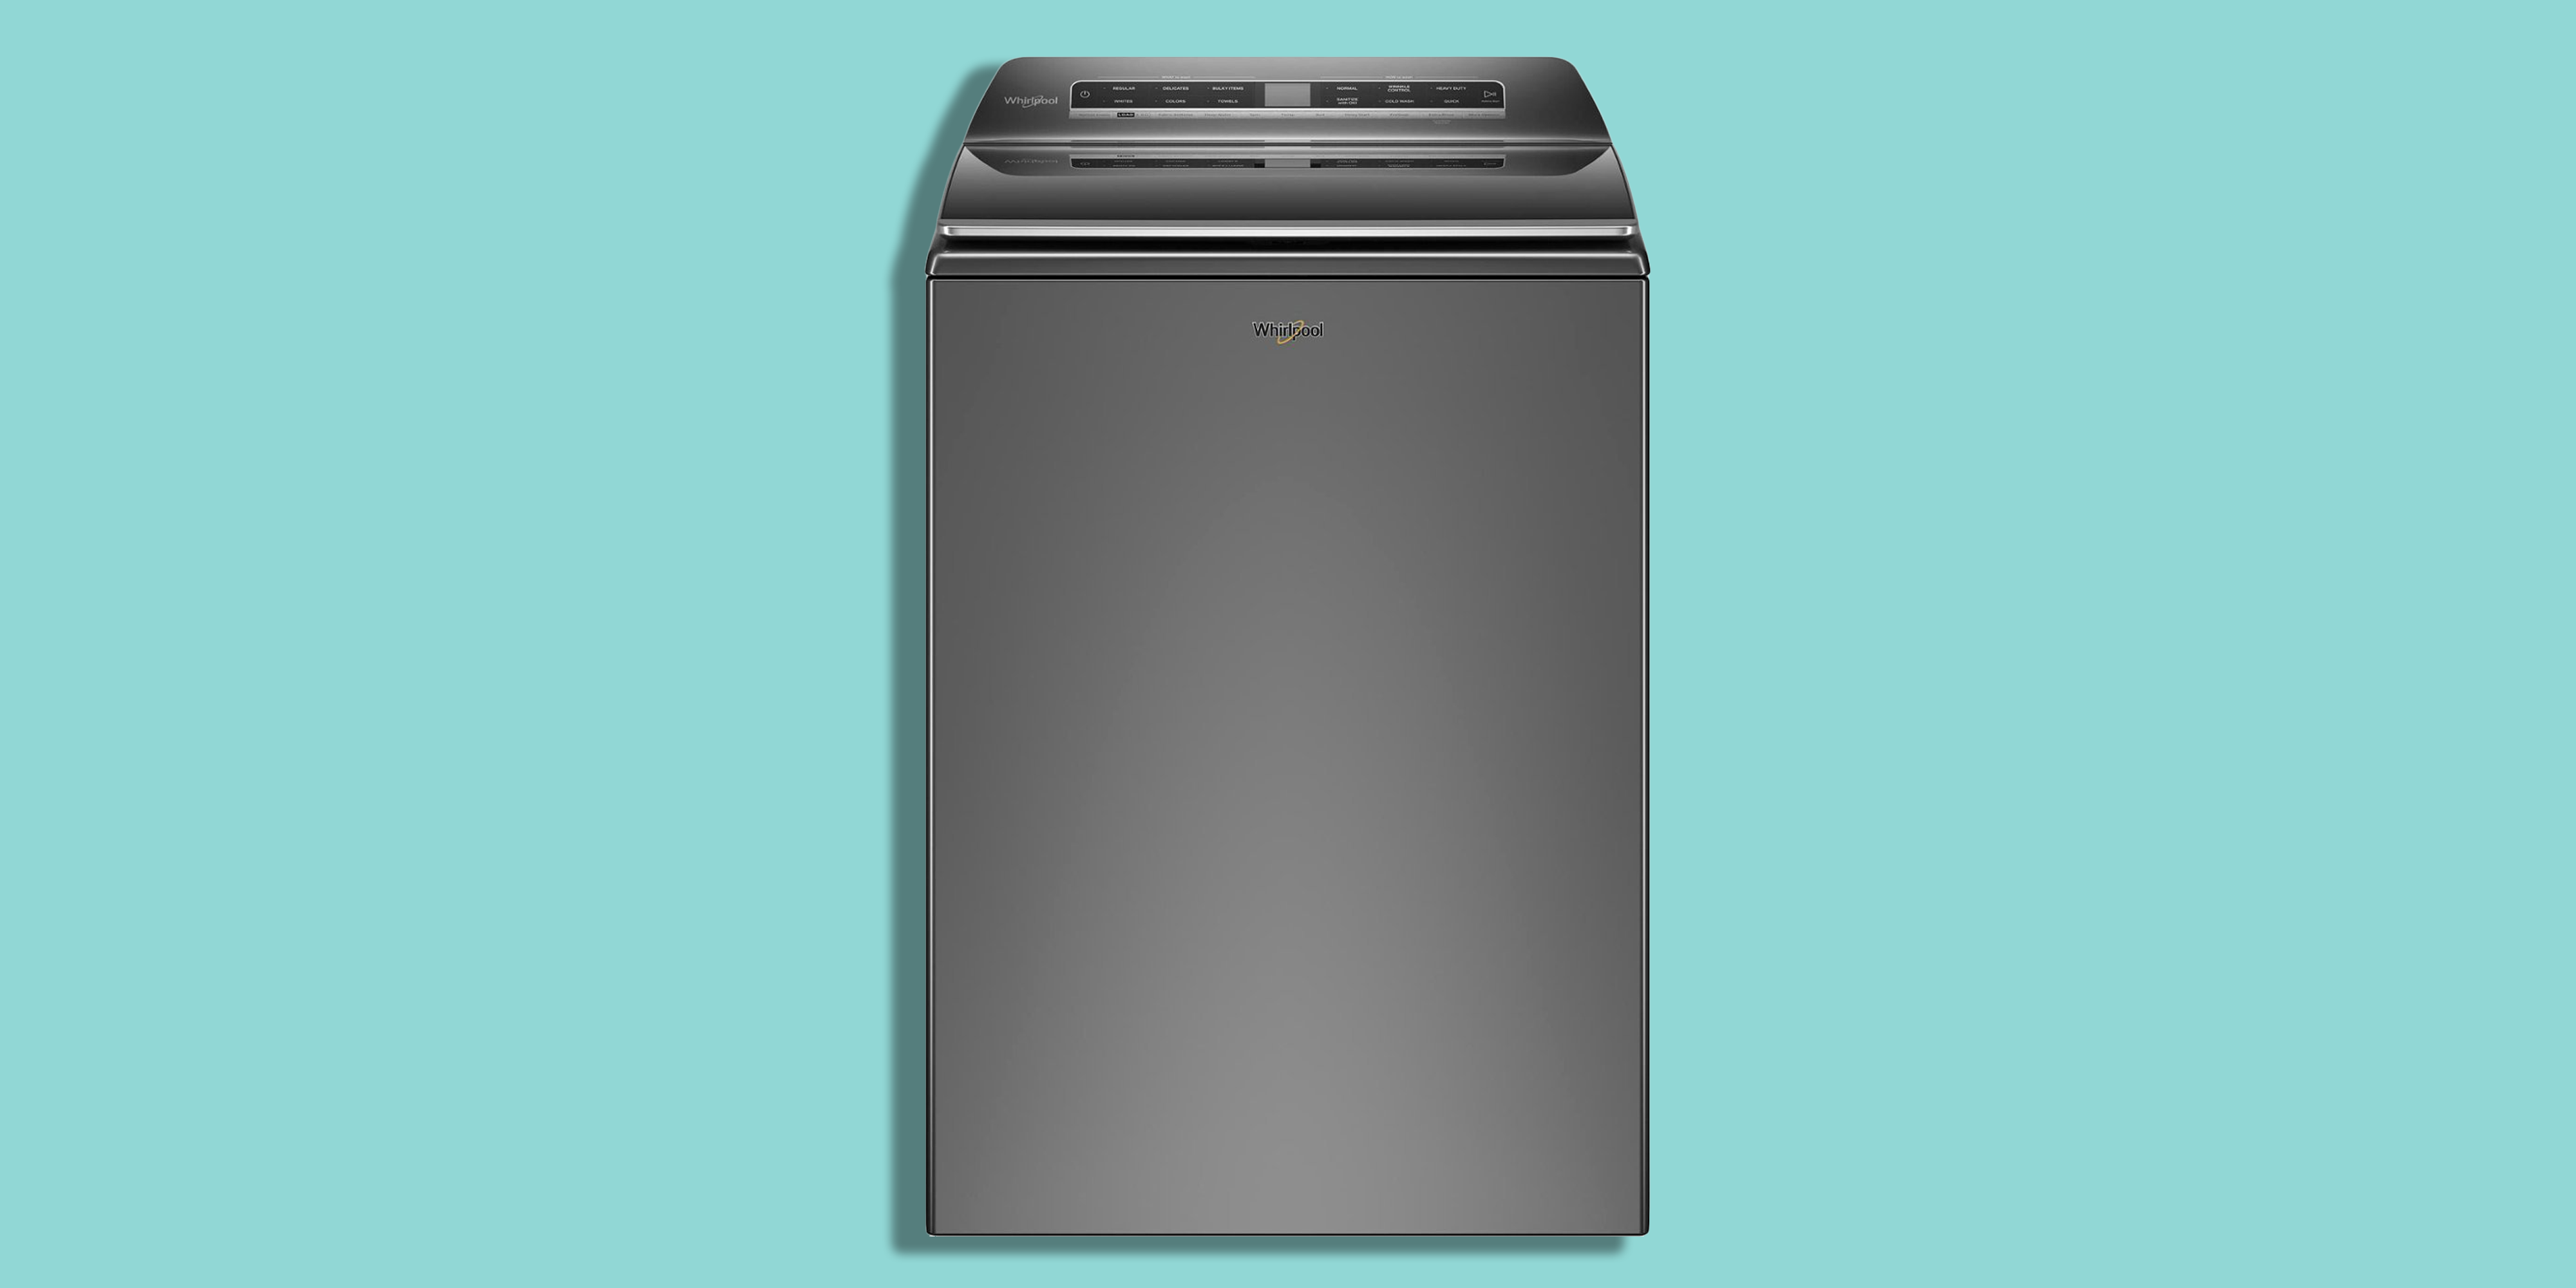 5 Best Top-Loading Washing Machines of 2023